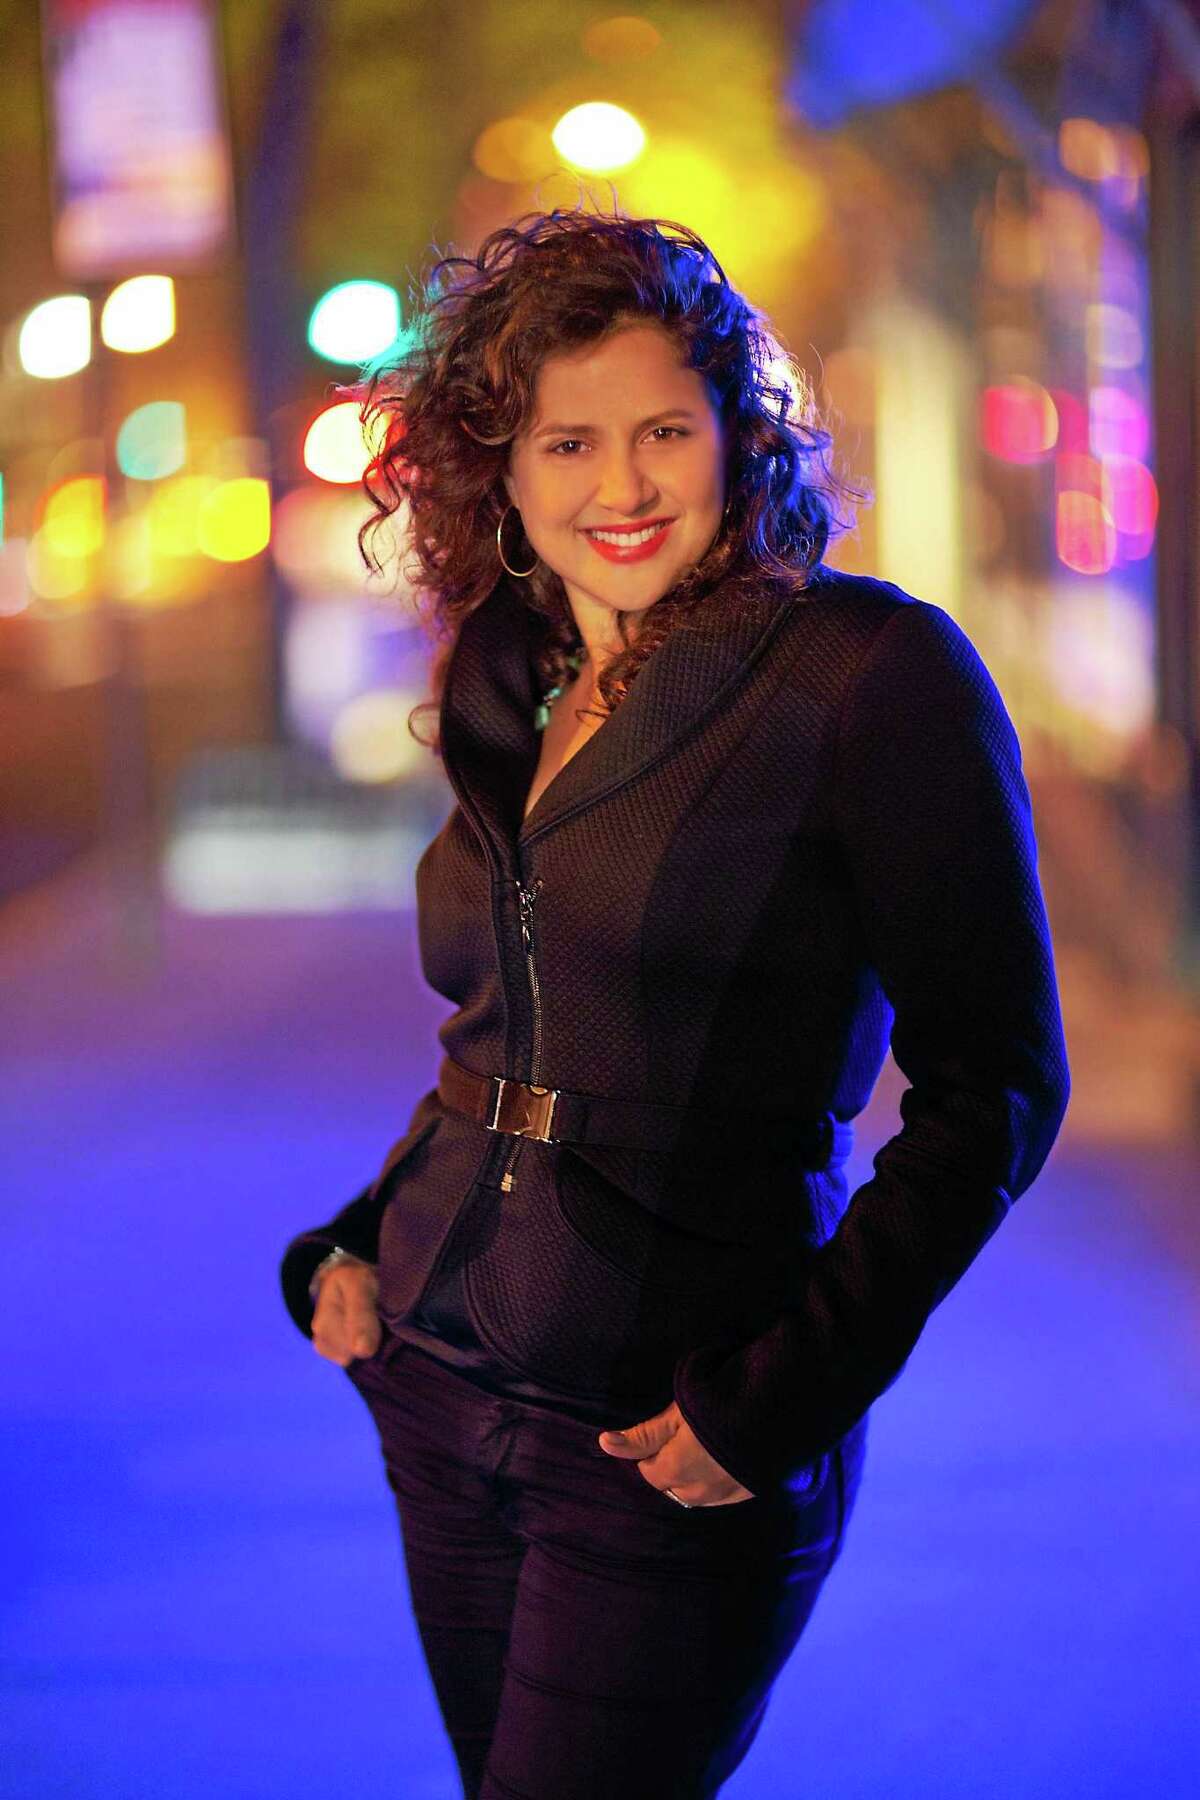 Photo by Jimmy Katz The Friday evening headliner of the Litchfield Jazz Festival, set for Aug. 7-9 in Goshen, is a perennial criticís and fanís favorite, clarinetist/saxophonist, Anat Cohen and her Quartet. Cohen is making her second appearance at Litchfield.